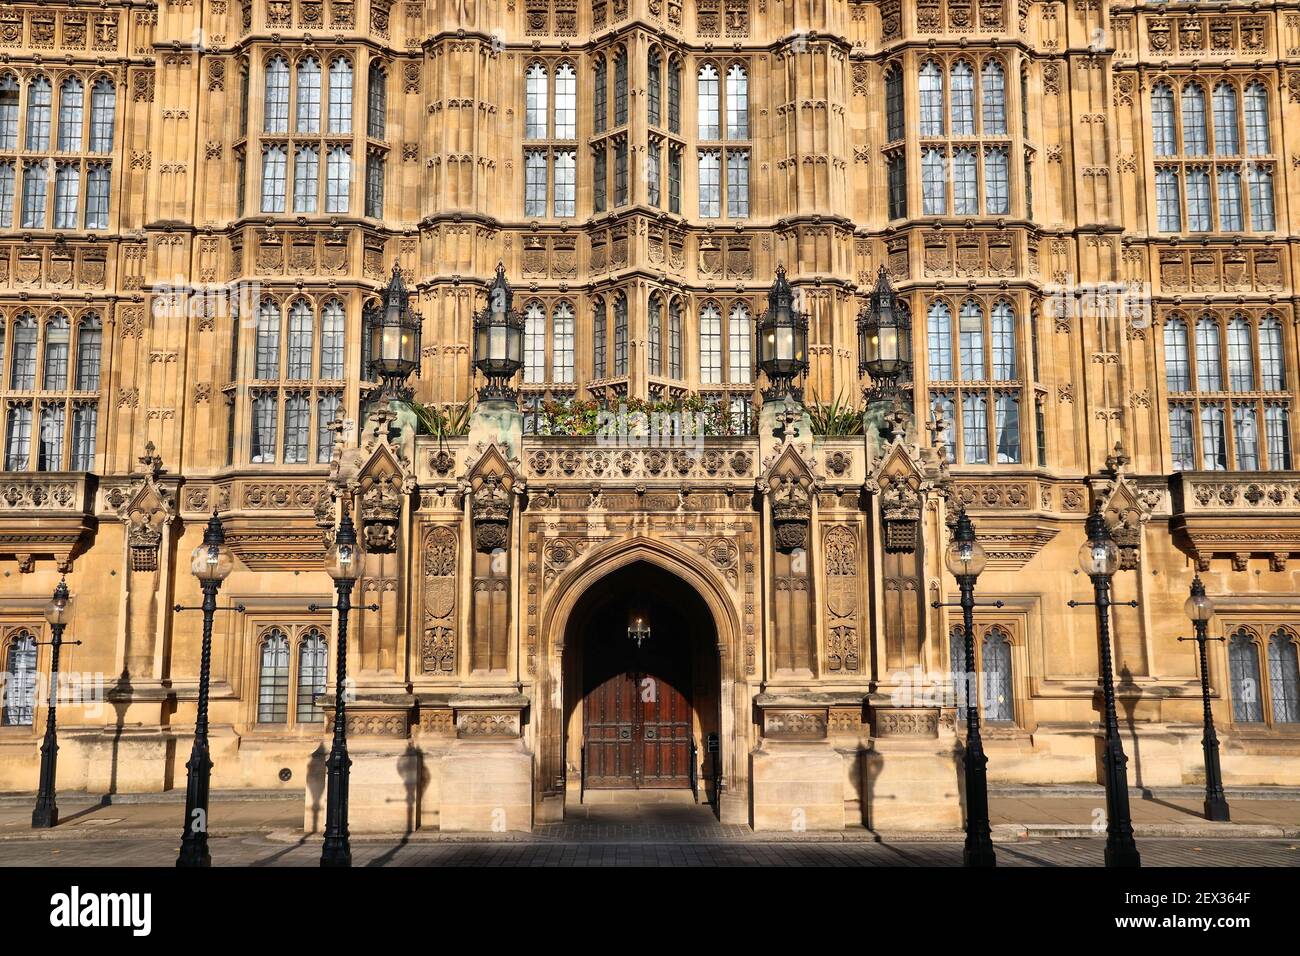 Palace of Westminster in London. British architecture. Stock Photo